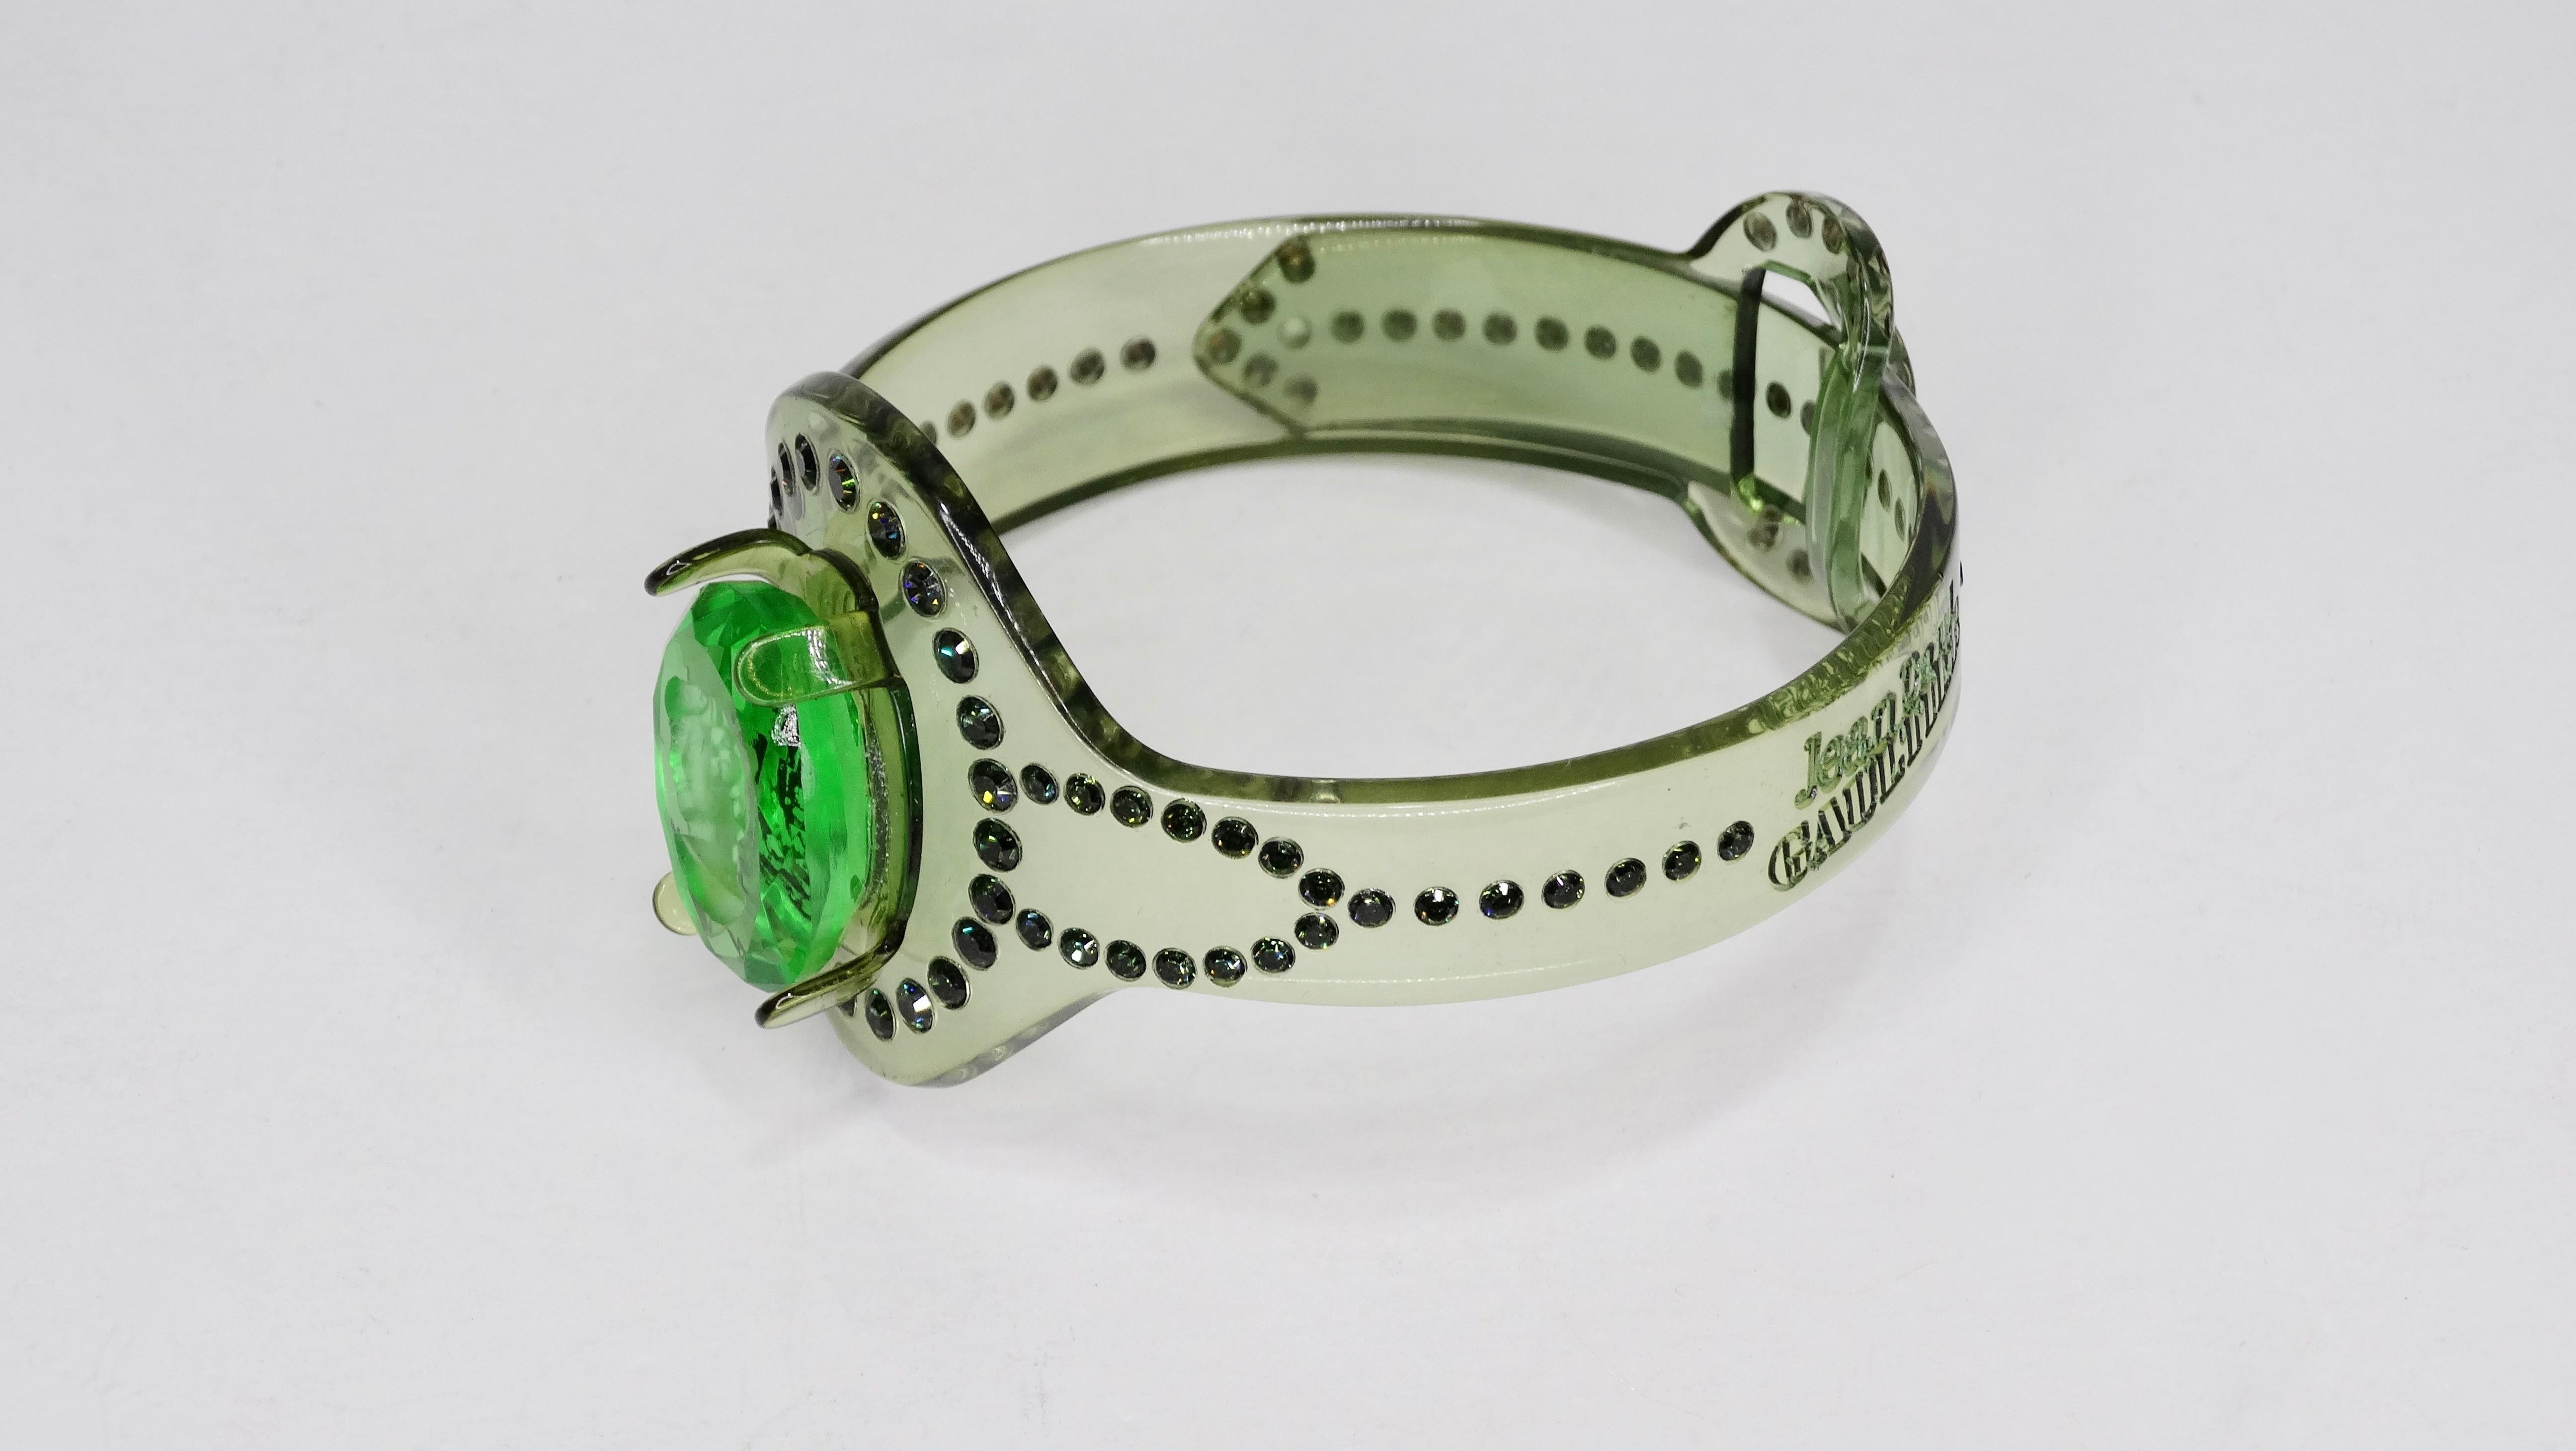 Add some edge to your looks! Circa early 2000s, this green acrylic bracelet is adorned with rhinestones and a lime green intaglio motif. Stamped JPG and opens like a belt closure. Best fit for a size 7-9